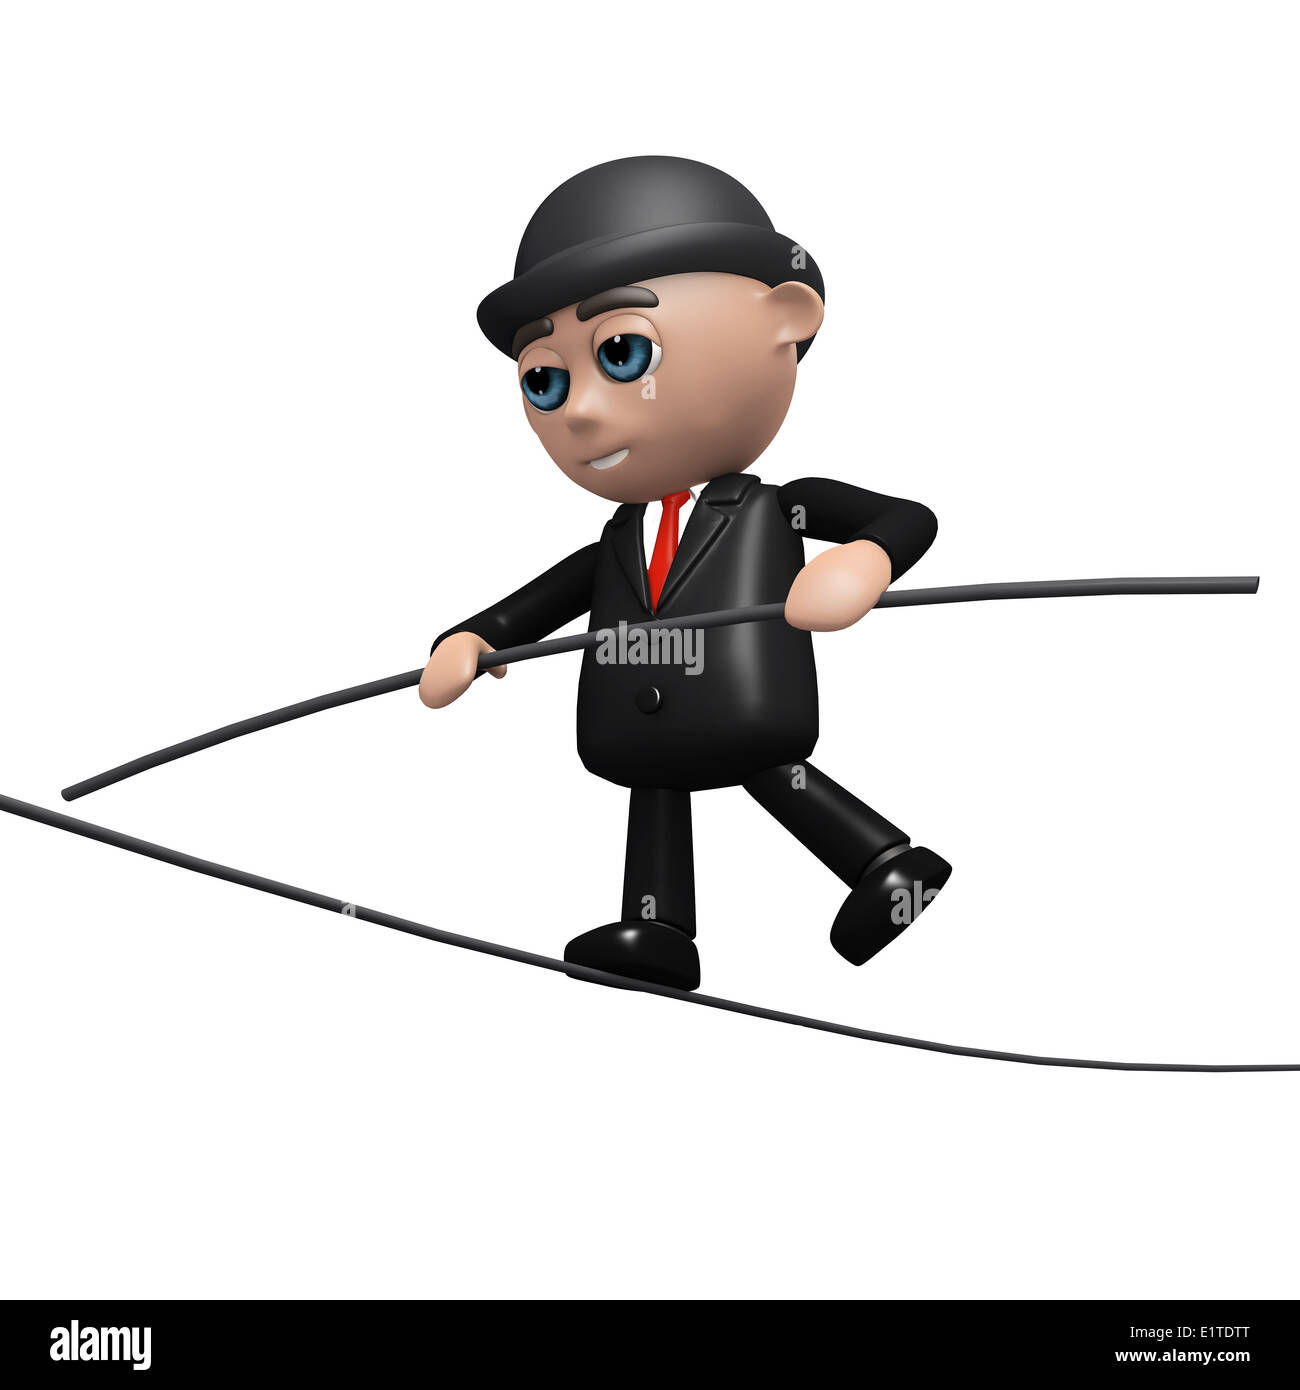 Tightrope Overcome Meaning High Line And Business 3d Rendering Stock Photo  - Alamy